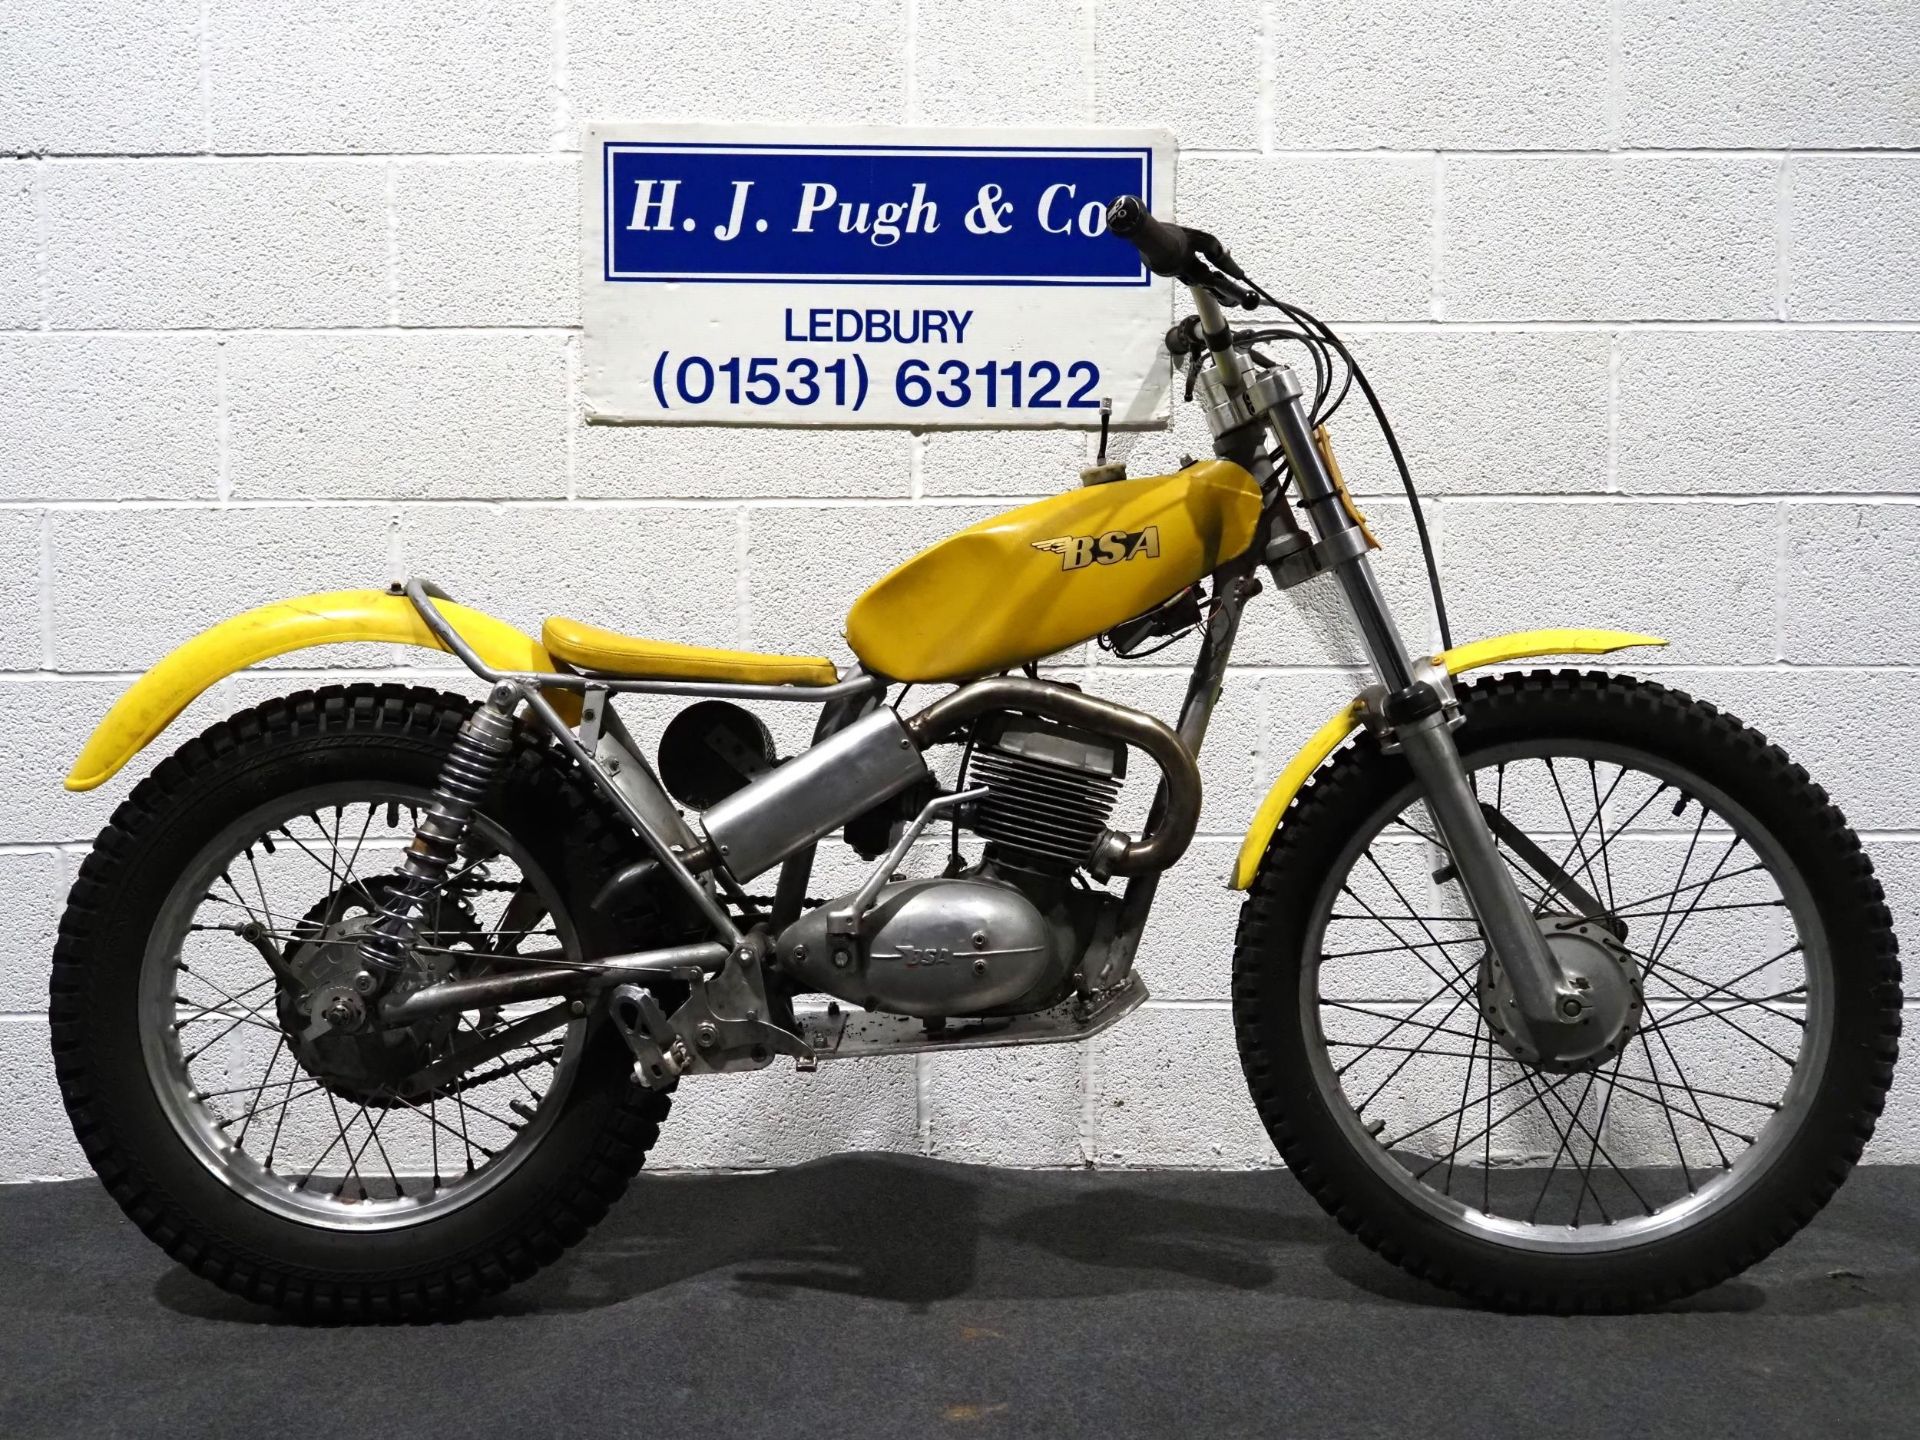 BSA Bantam trials motorcycle. 175cc Engine no. CEO7780B175 Property of a deceased estate. This